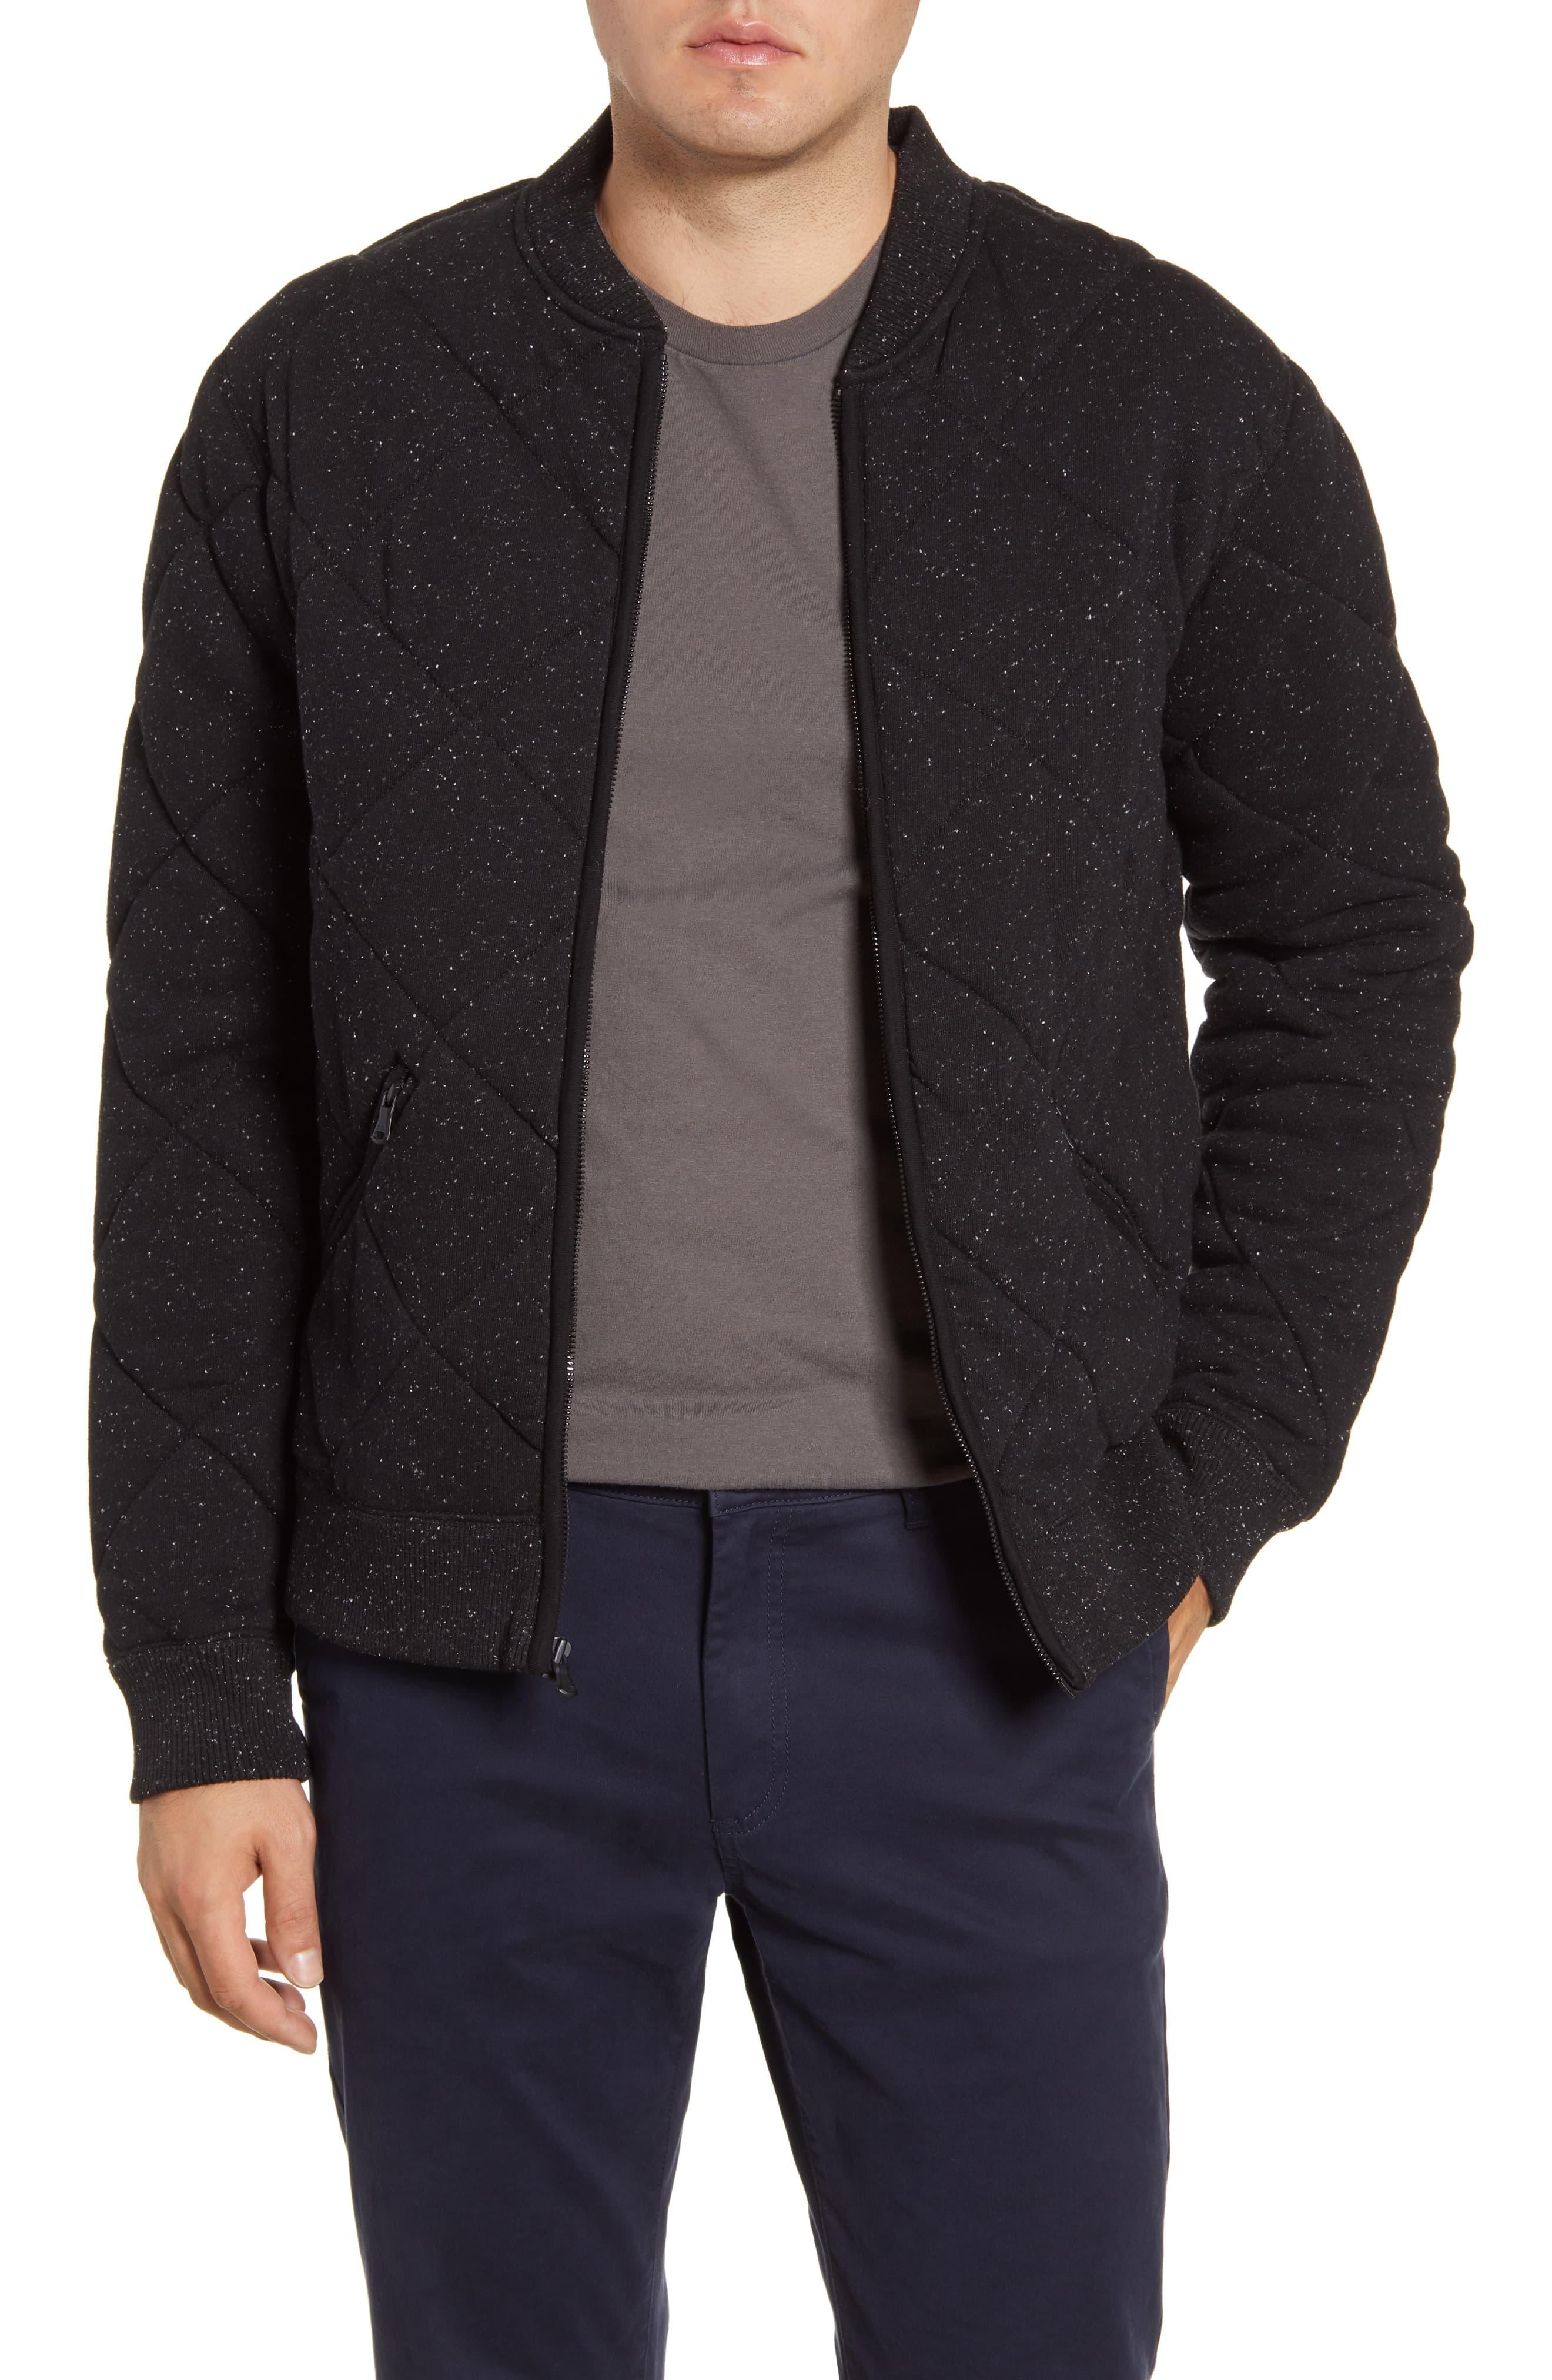 Bonobos Cotton Slim Fit Quilted Bomber Jacket in Black for Men - Lyst